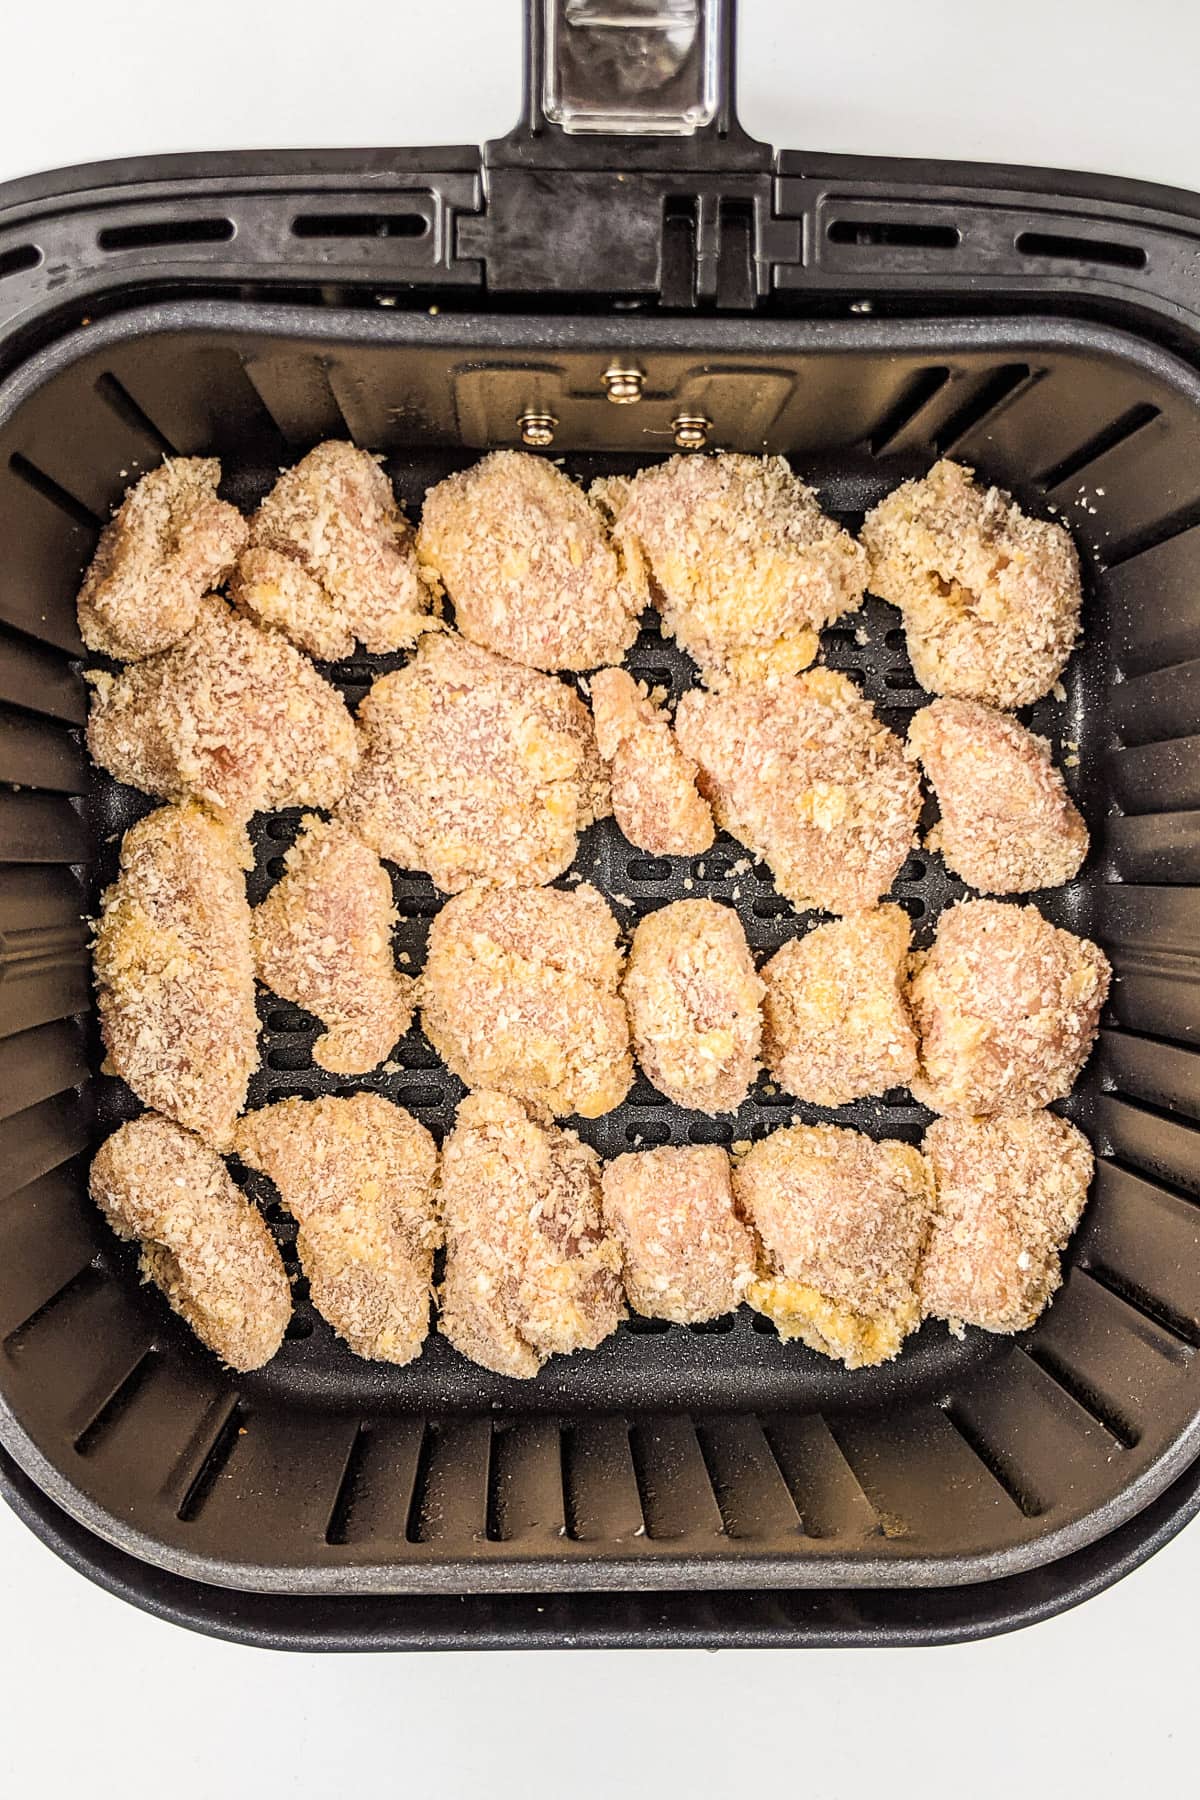 Air fryer basket with raw chicken nuggets in panko.